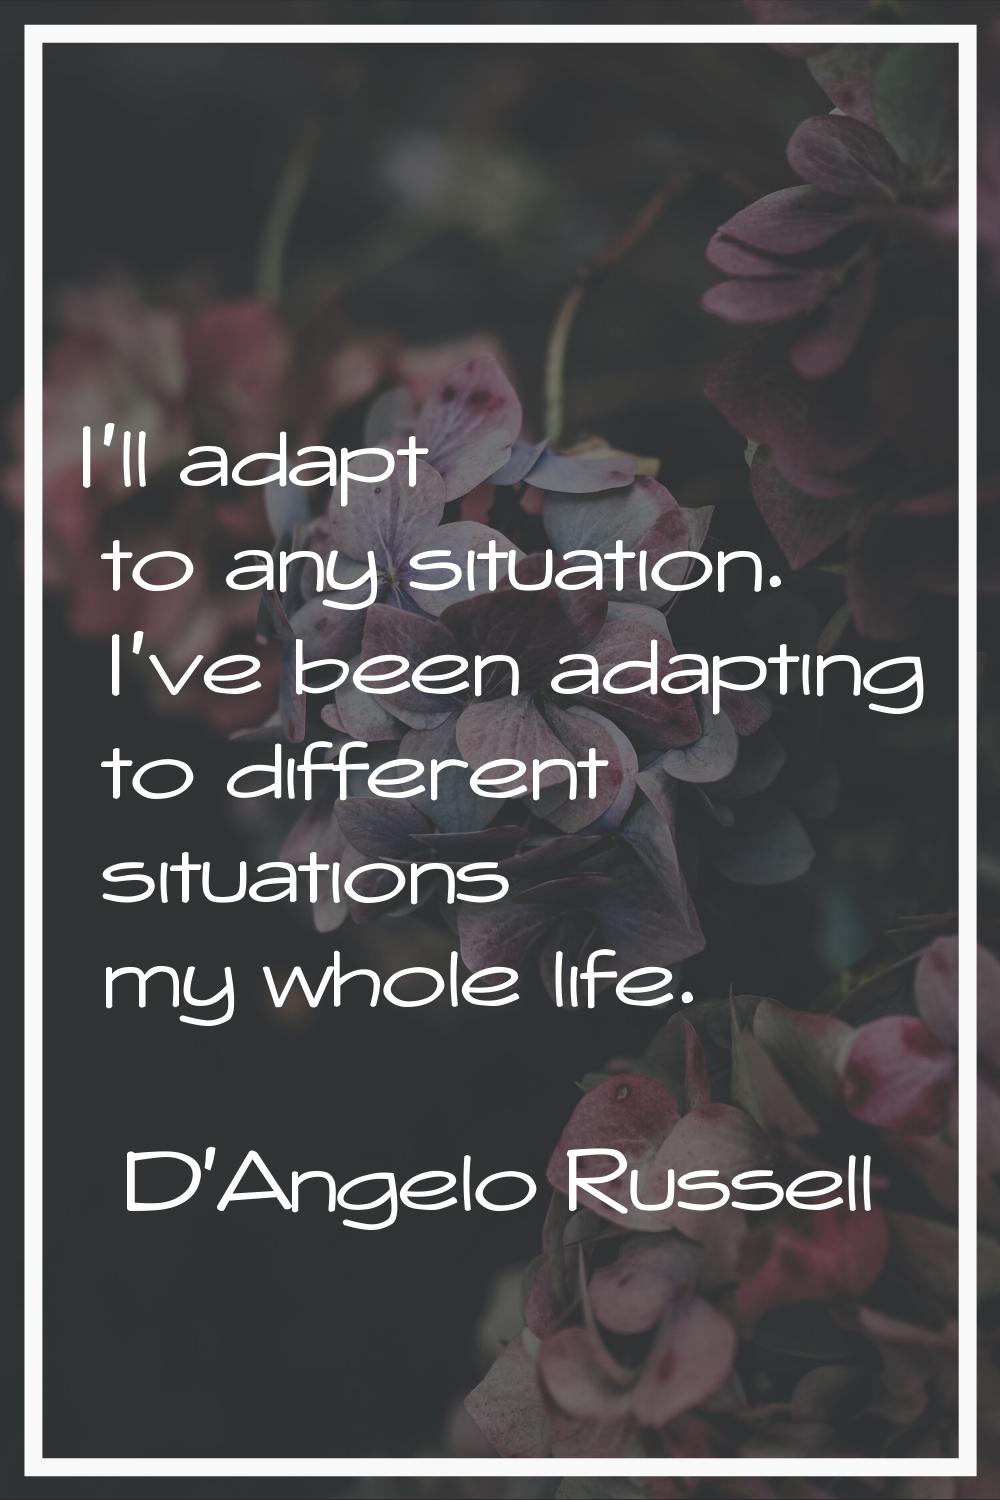 I'll adapt to any situation. I've been adapting to different situations my whole life.